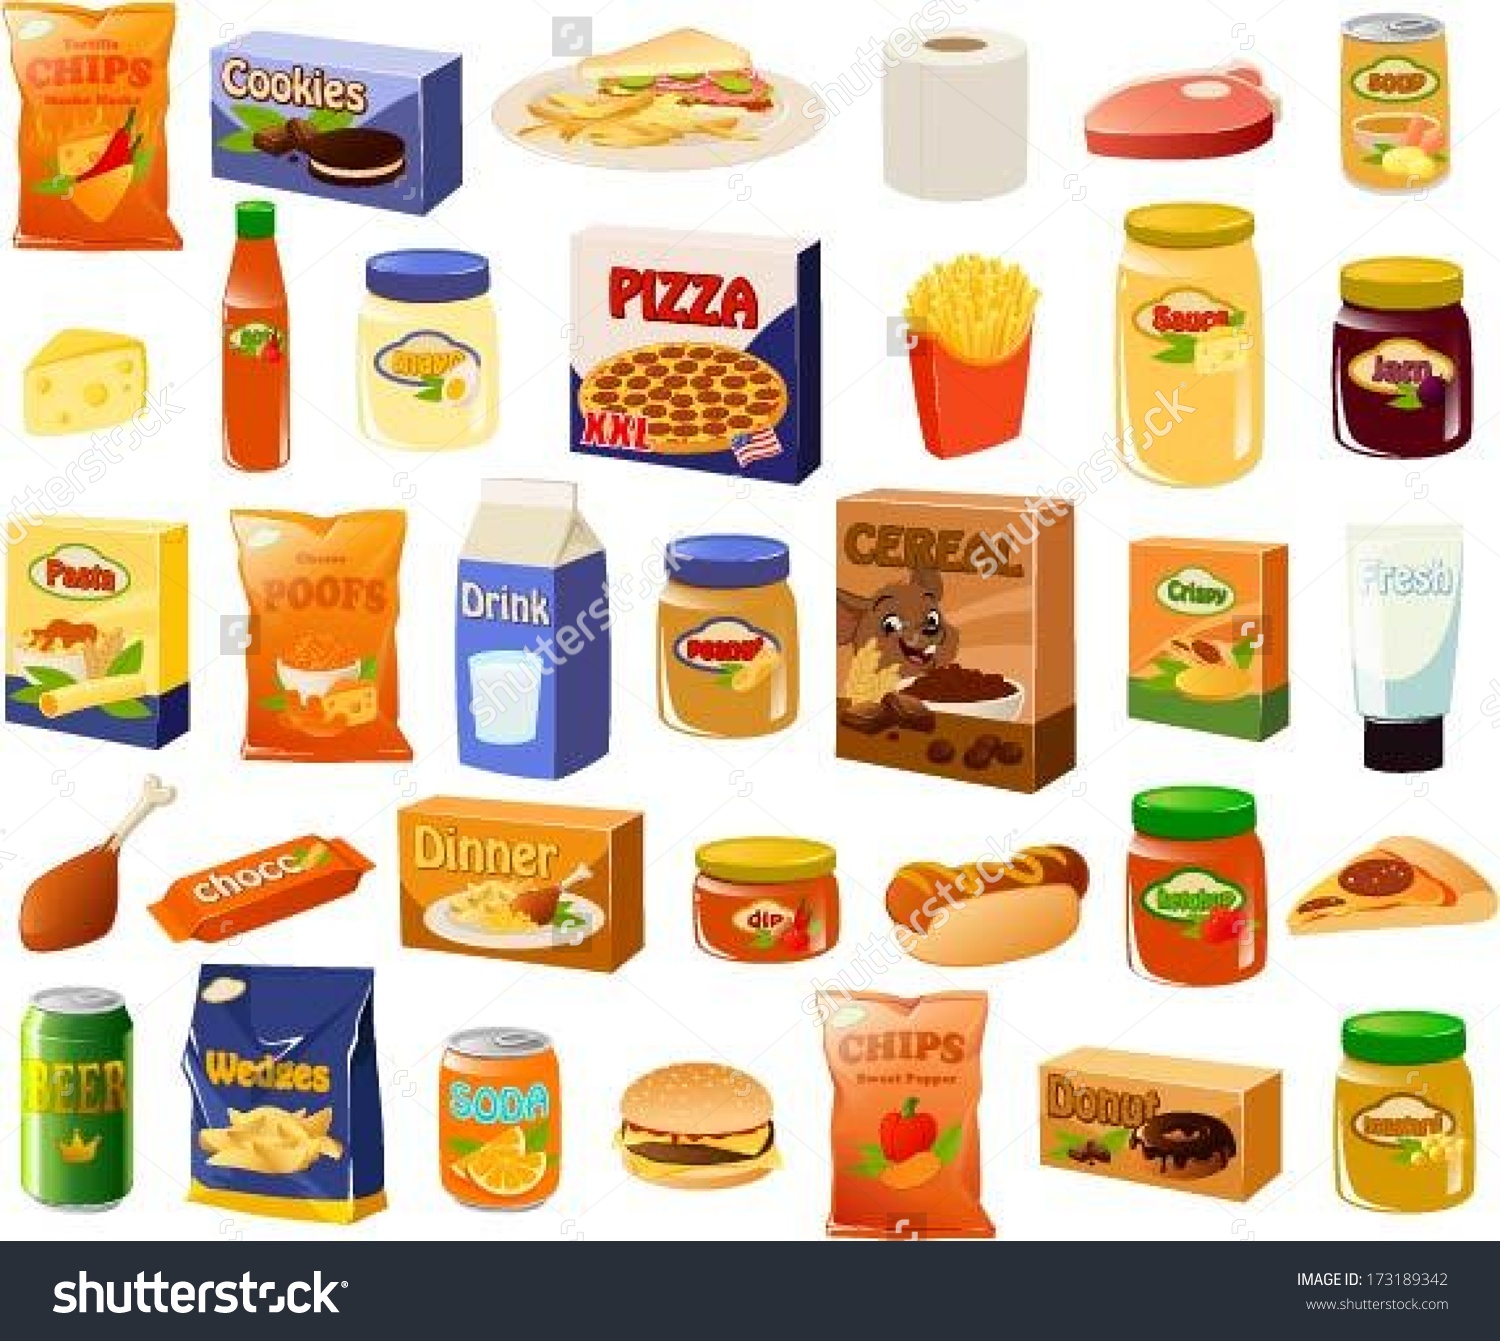 Free Frozen Meal Cliparts, Download Free Clip Art, Free ...